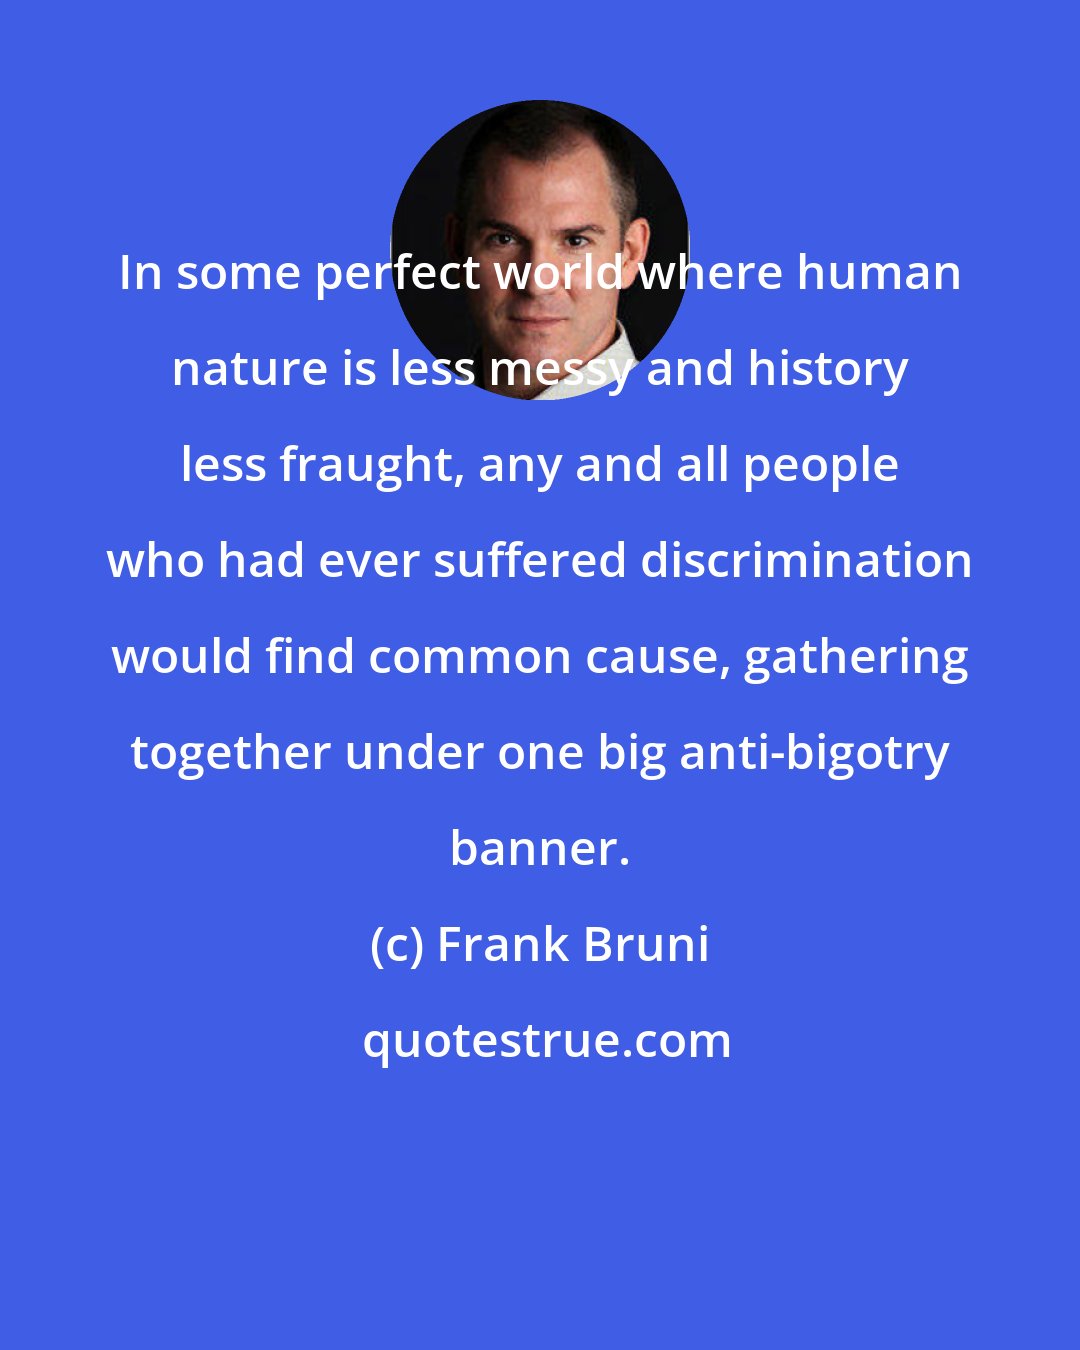 Frank Bruni: In some perfect world where human nature is less messy and history less fraught, any and all people who had ever suffered discrimination would find common cause, gathering together under one big anti-bigotry banner.